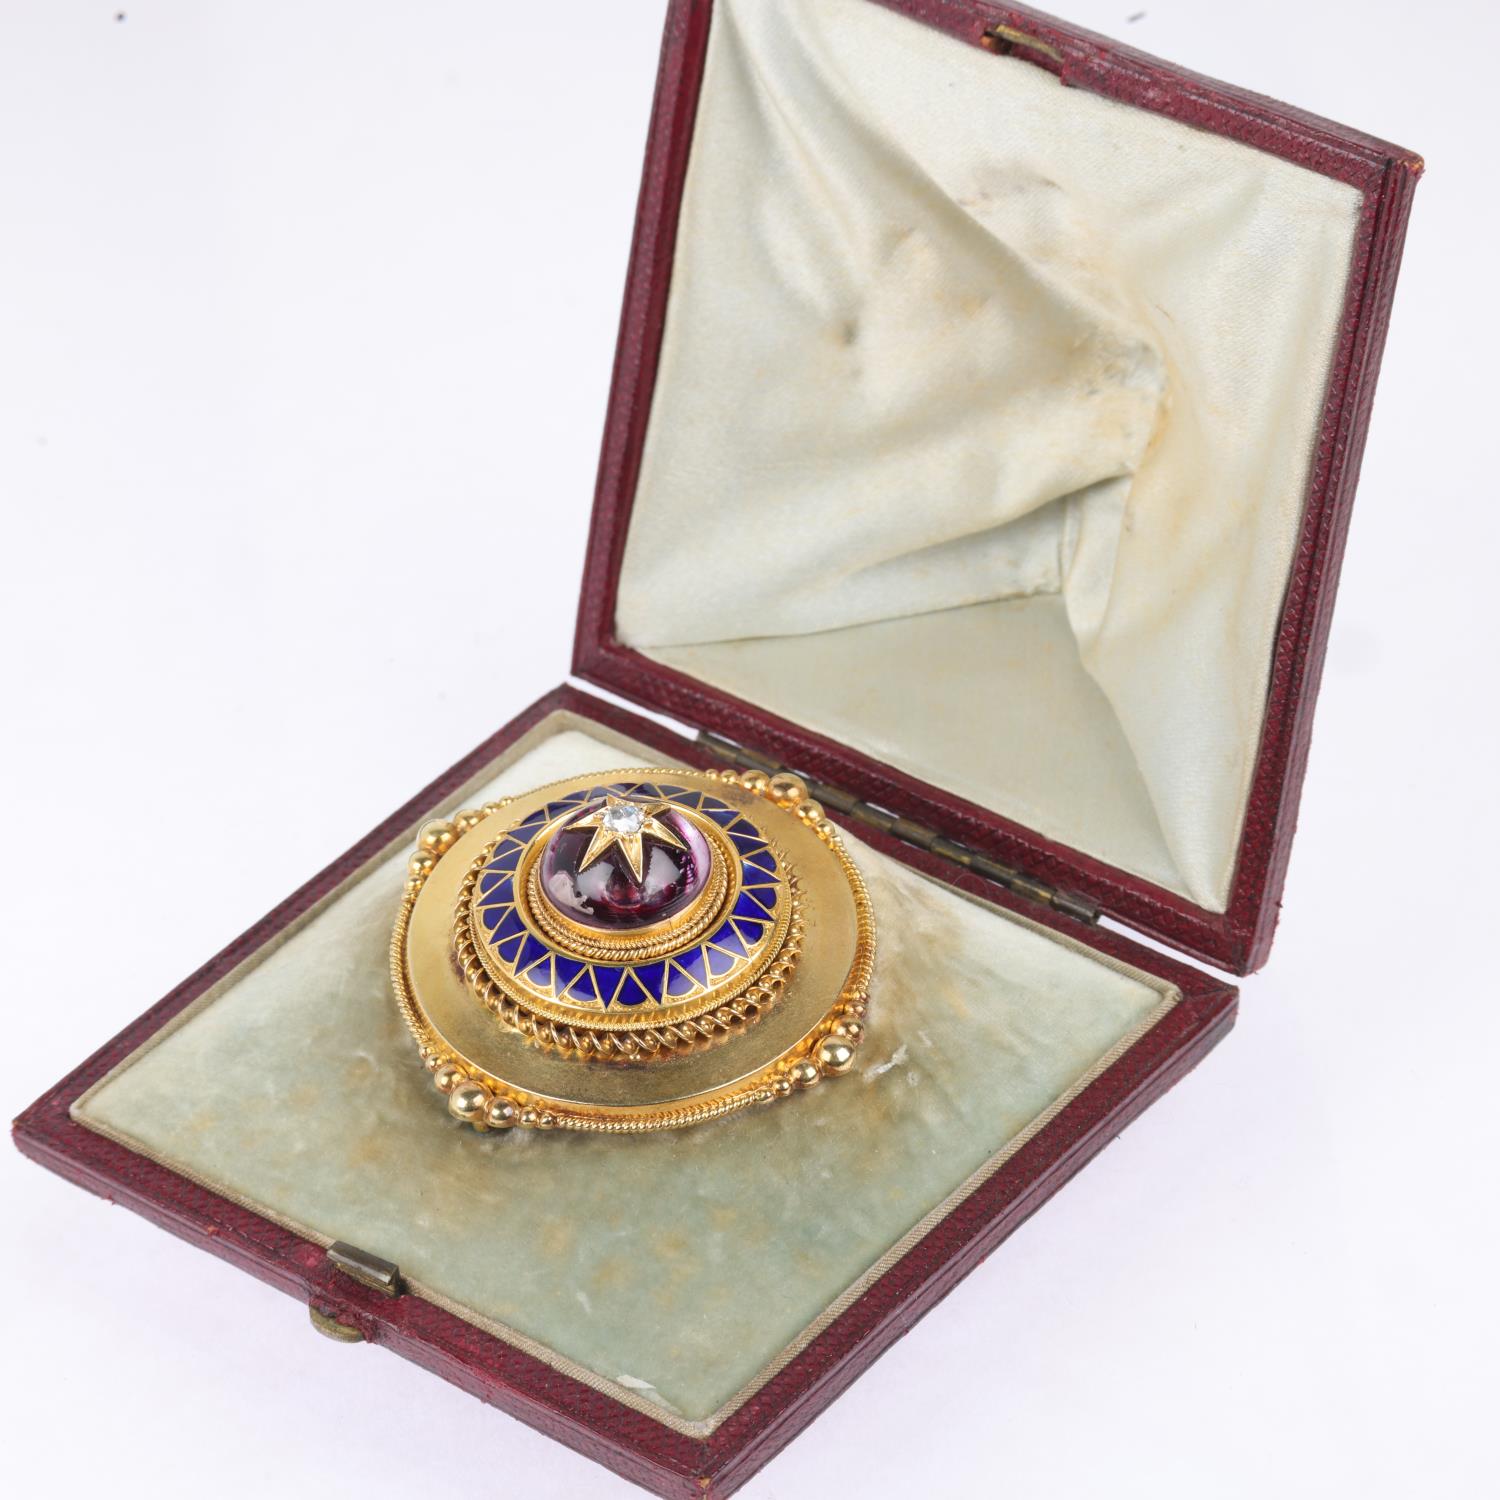 A Victorian Etruscan Revival diamond amethyst and blue enamel bombe memorial brooch, circa 1880, - Image 4 of 4